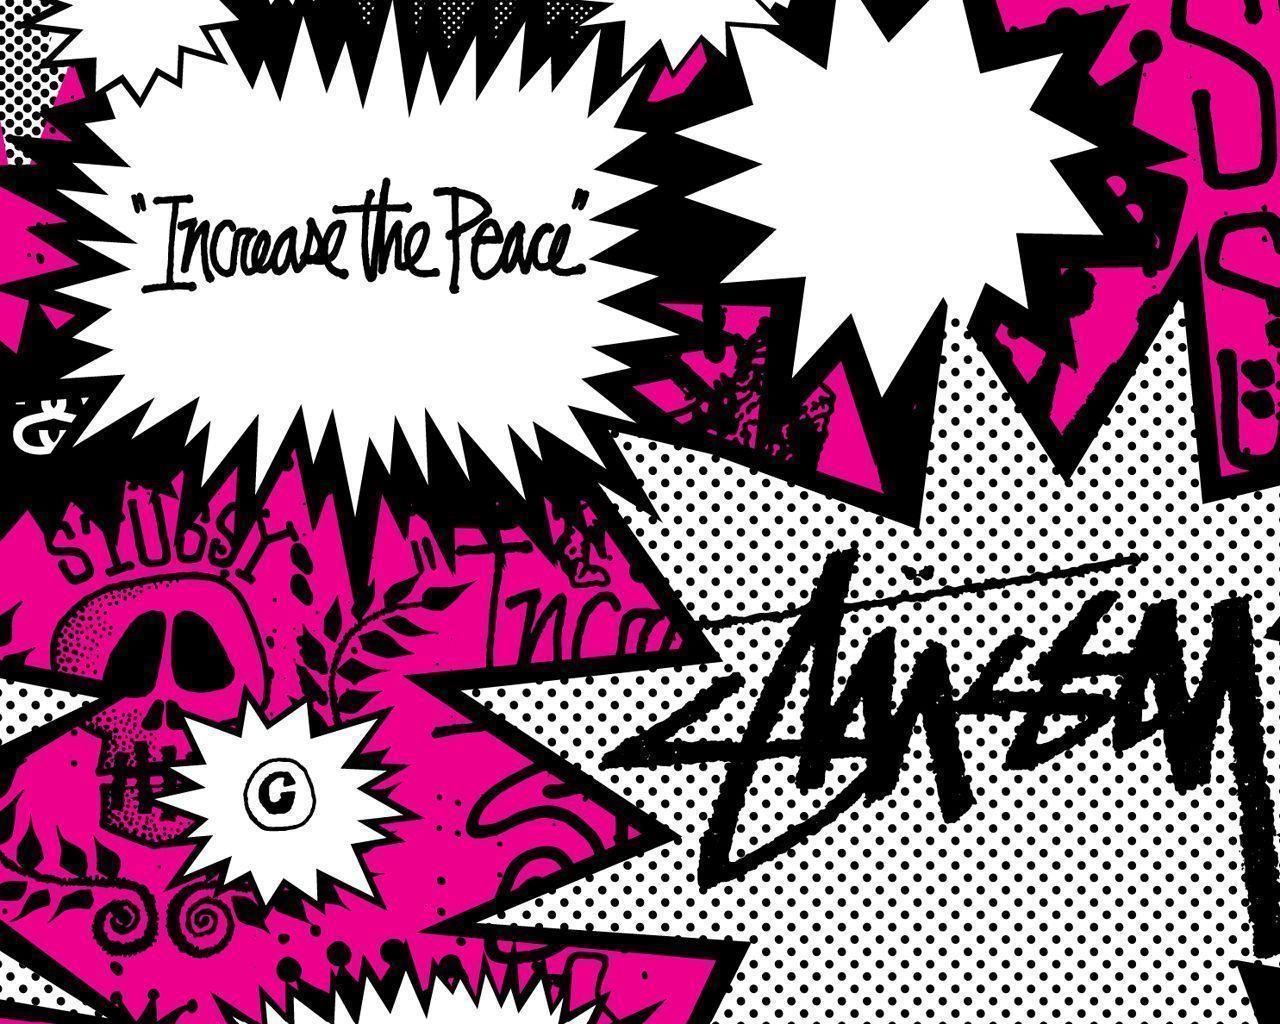 Increase The Peace wallpaper from Punk wallpaper